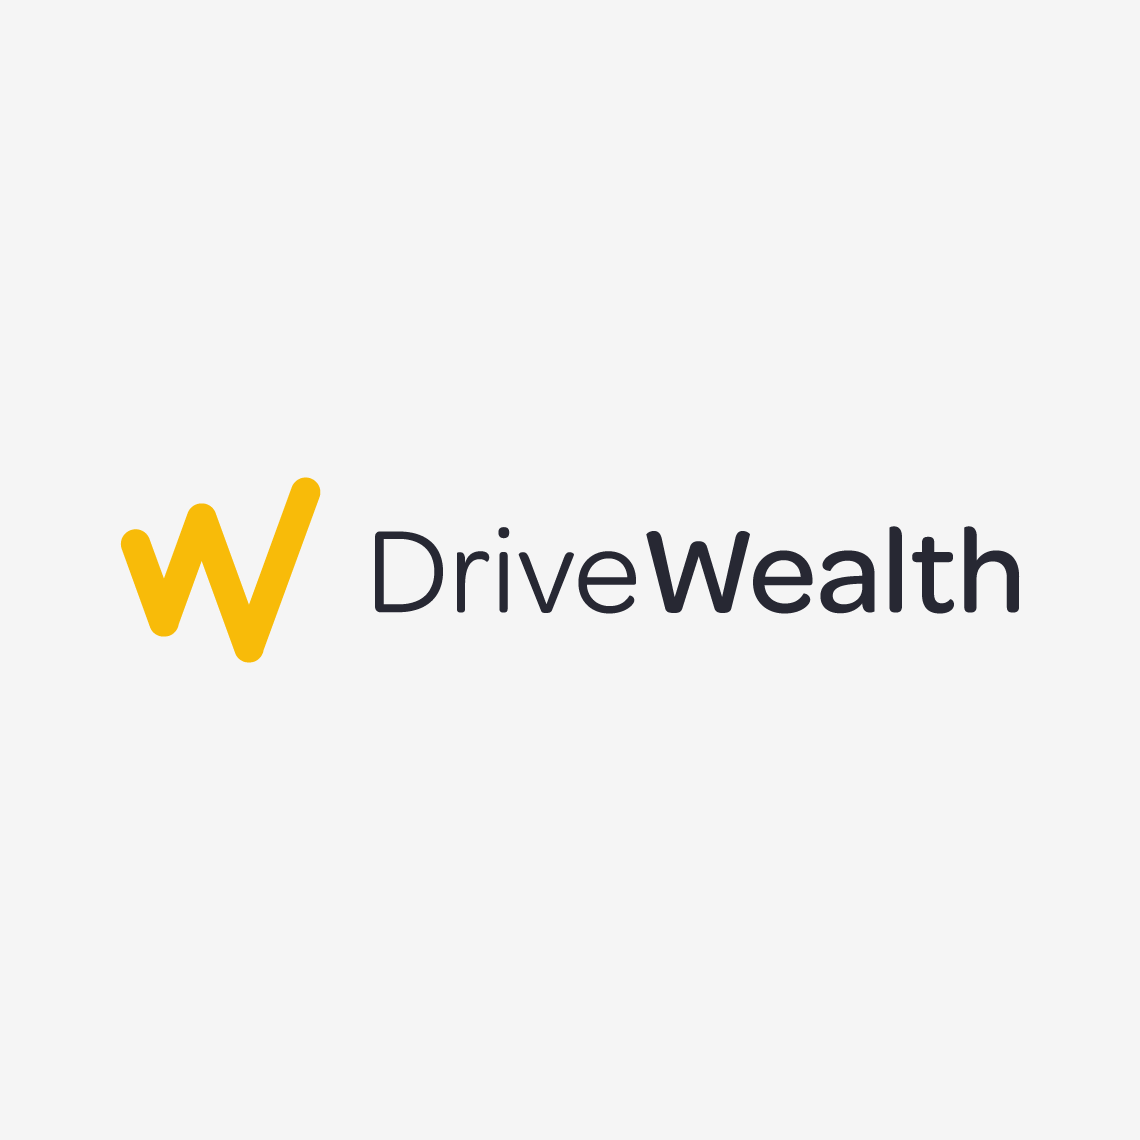 the new logo created for DriveWealth